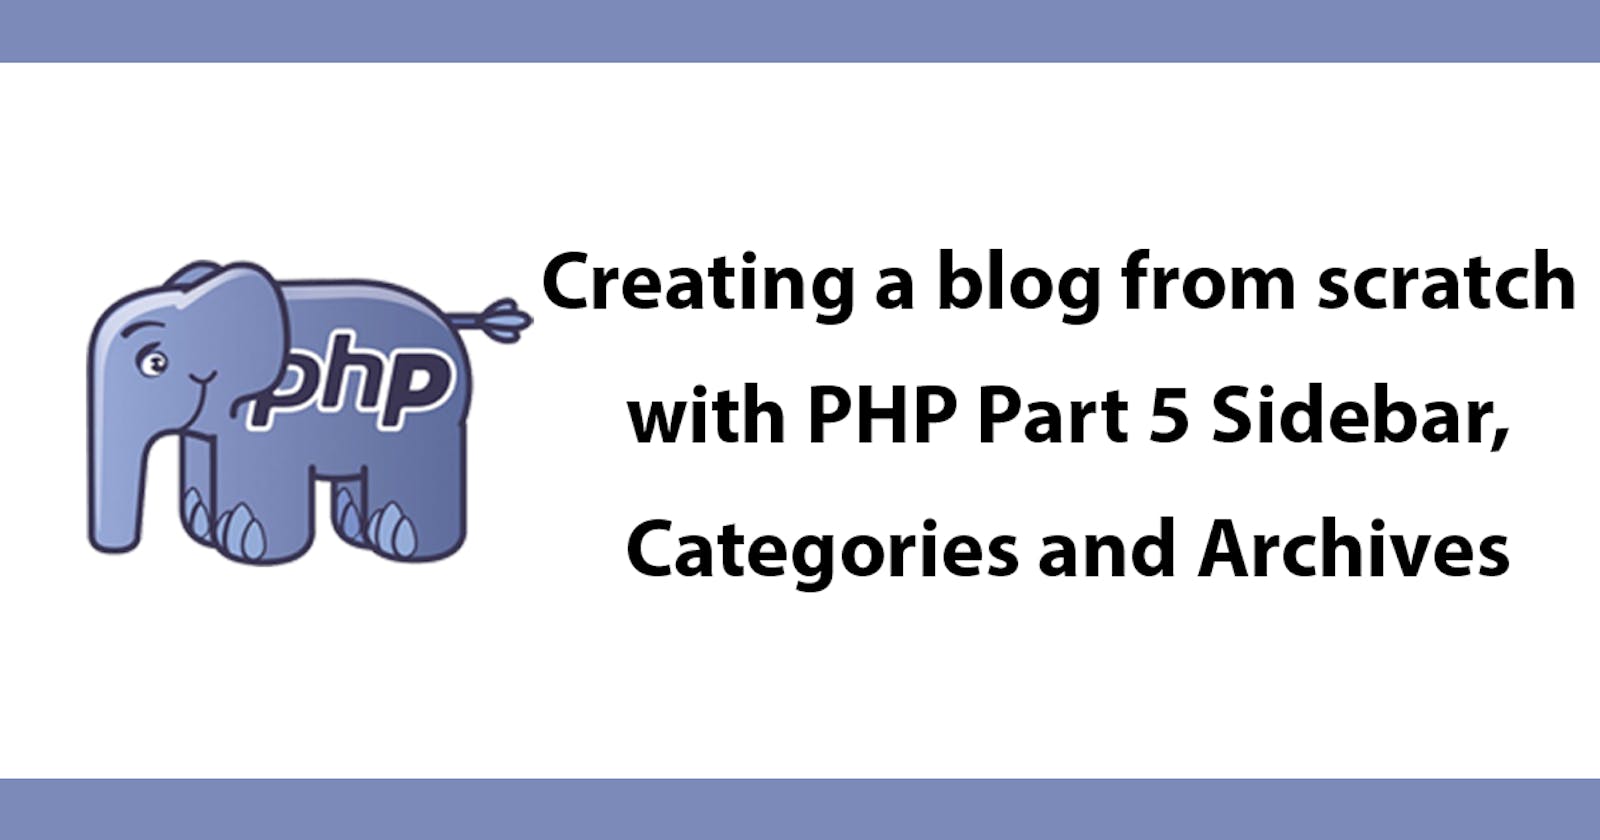 Creating a blog from scratch with PHP - Part 5 Sidebar, Categories and Archives